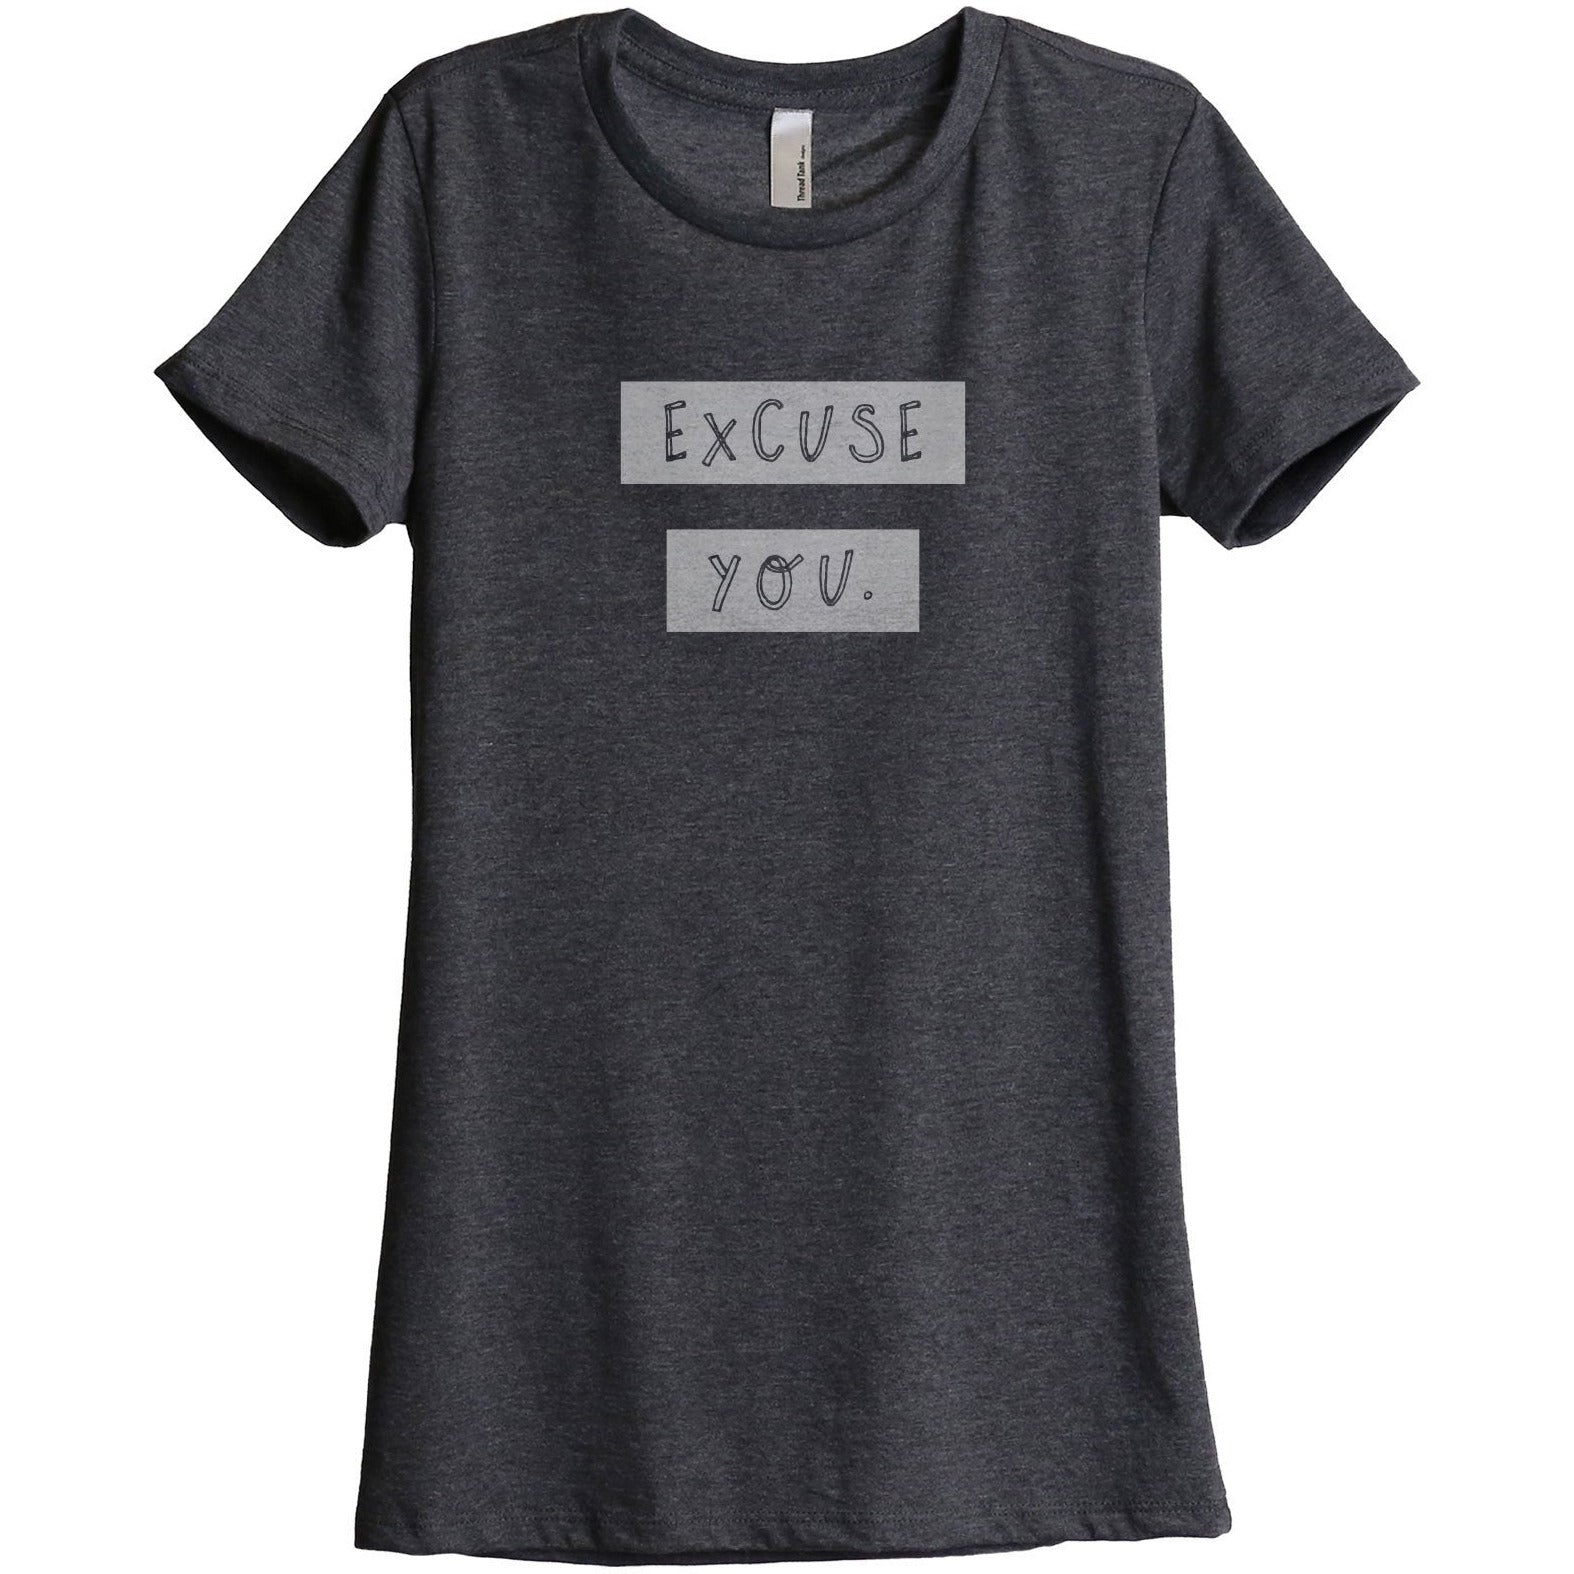 Excuse You Women's Relaxed Crewneck T-Shirt Top Tee Charcoal Grey
